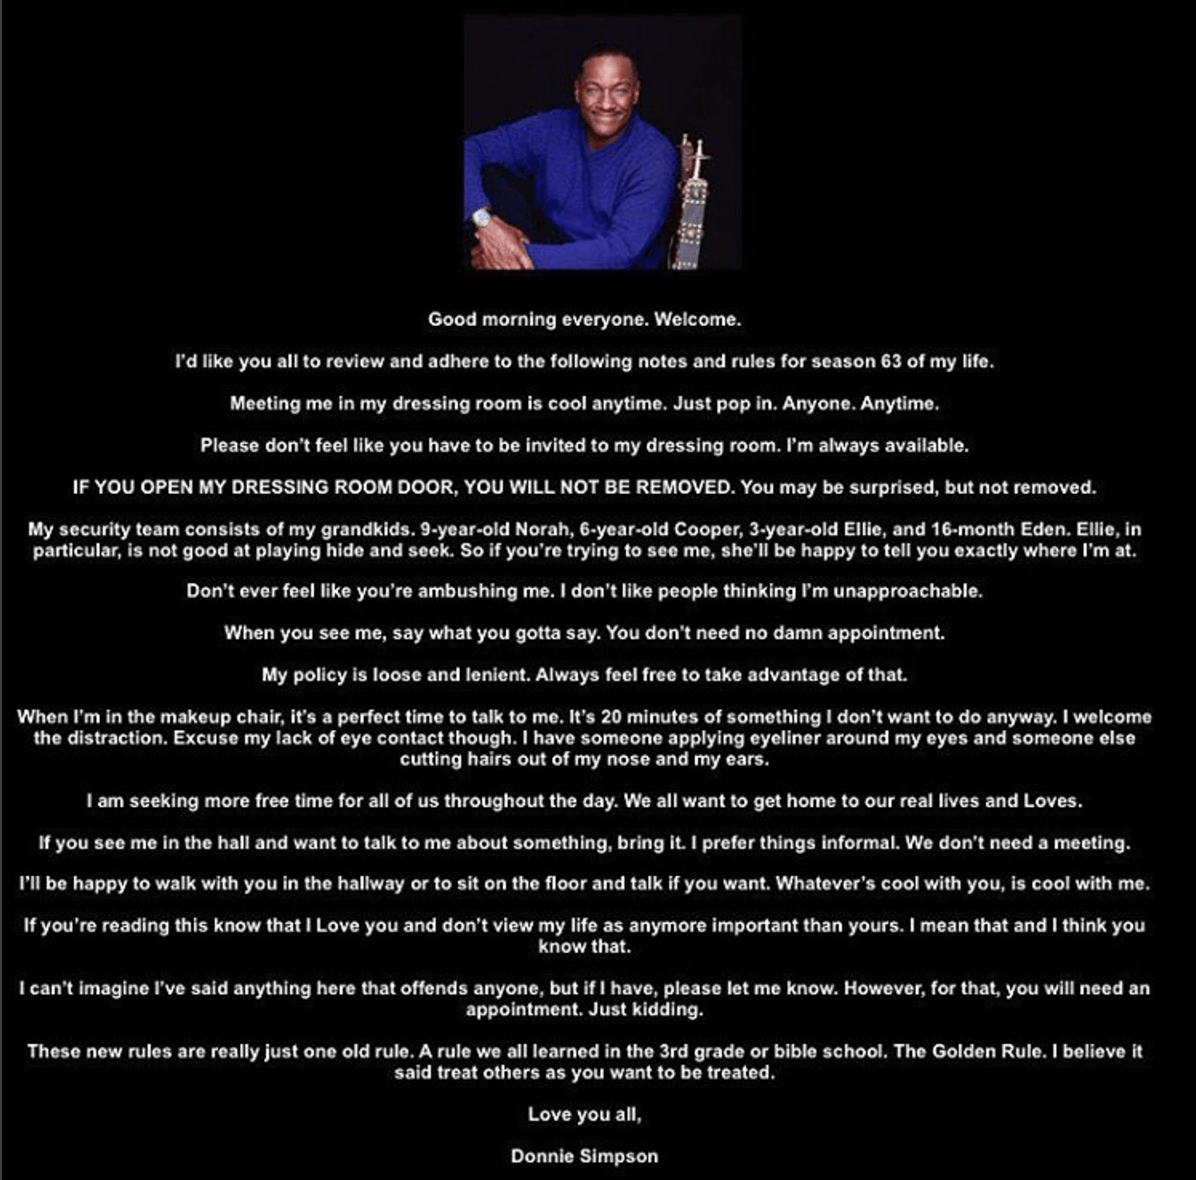 Donnie Simpson Email To Staff